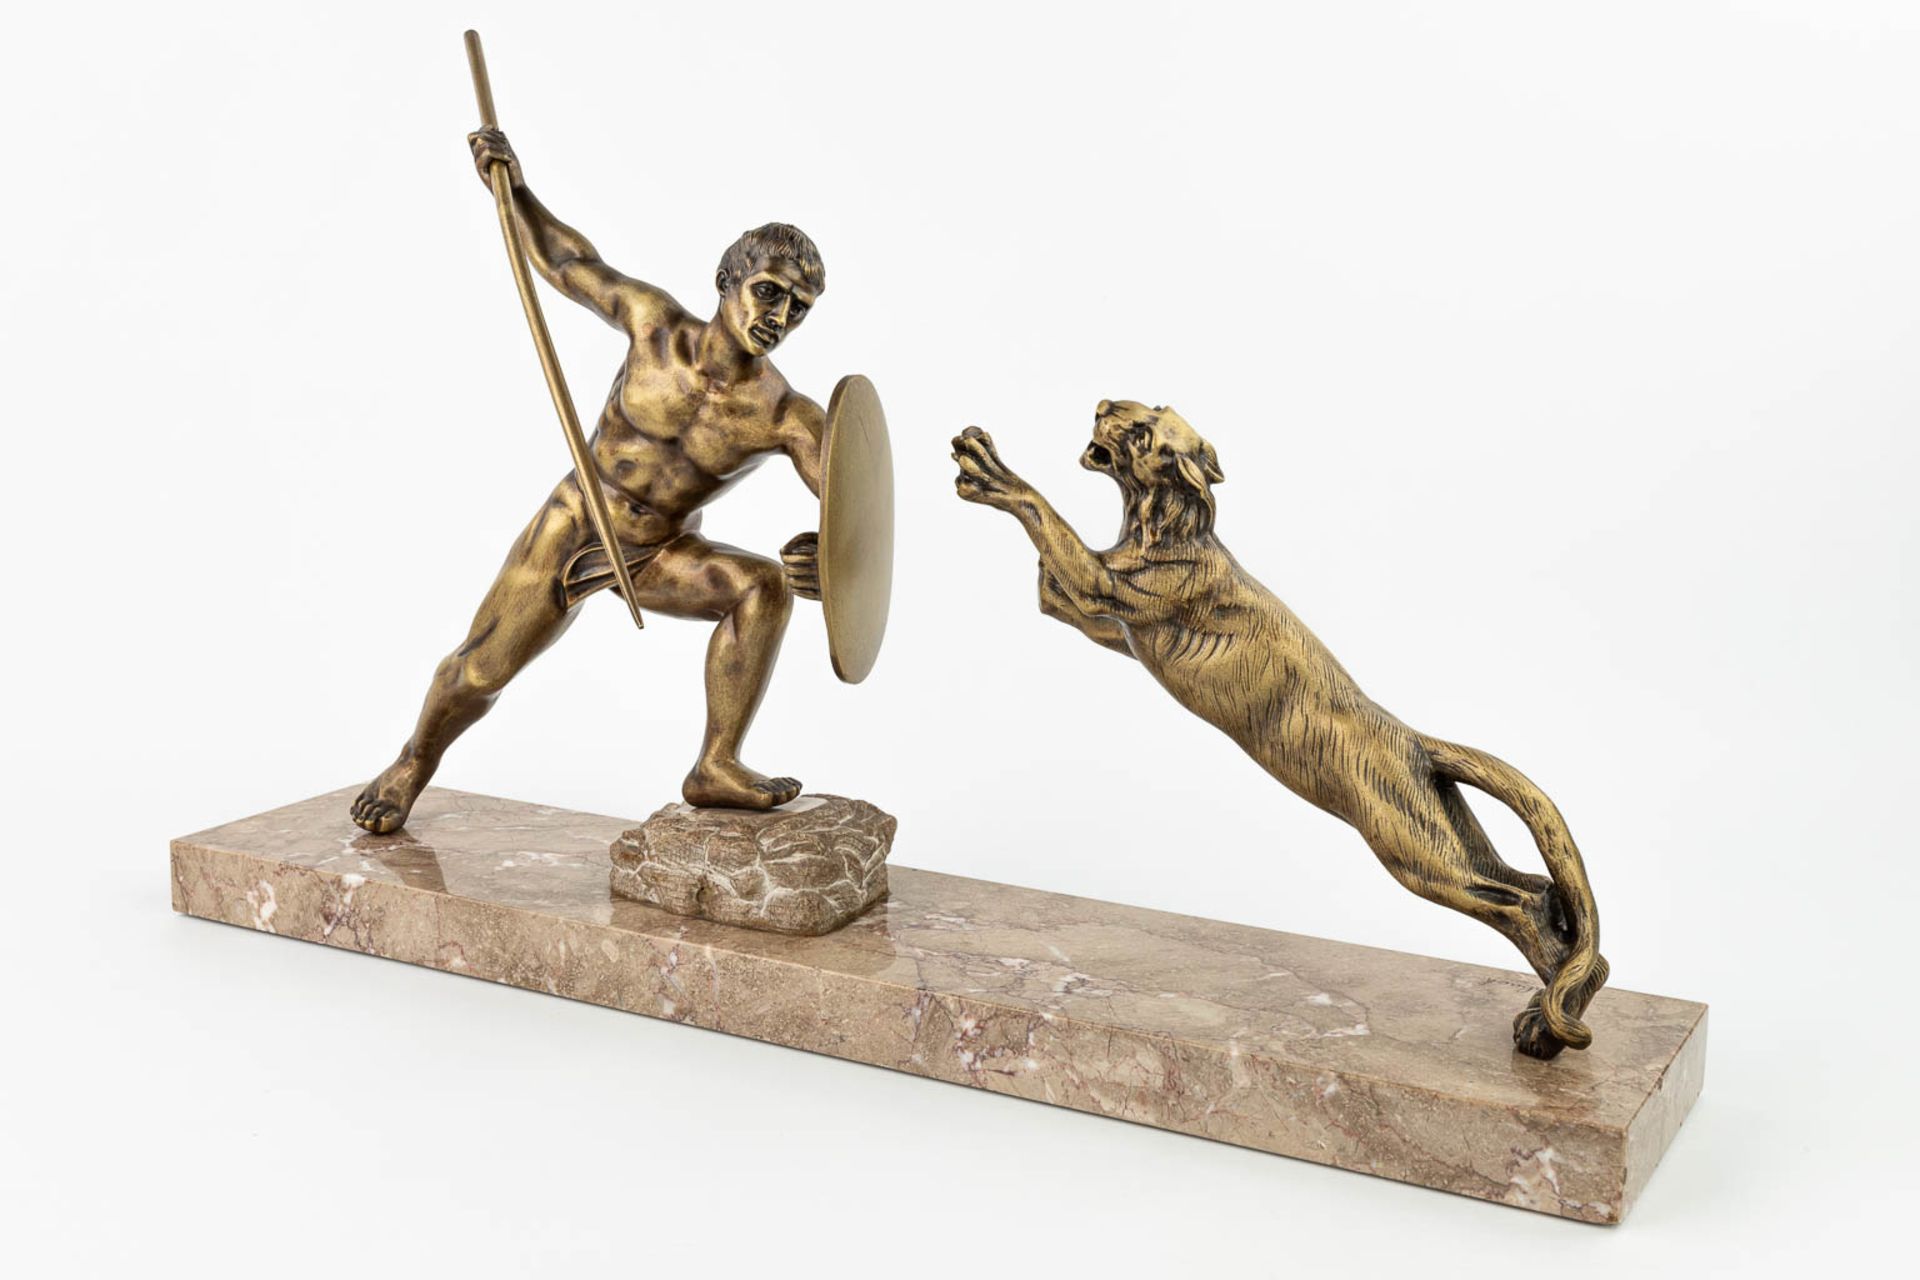 R. TUBACK (XIX-XX) 'Hunter with lion' an art deco statue made of bronze and mounted on a marble base - Image 3 of 11